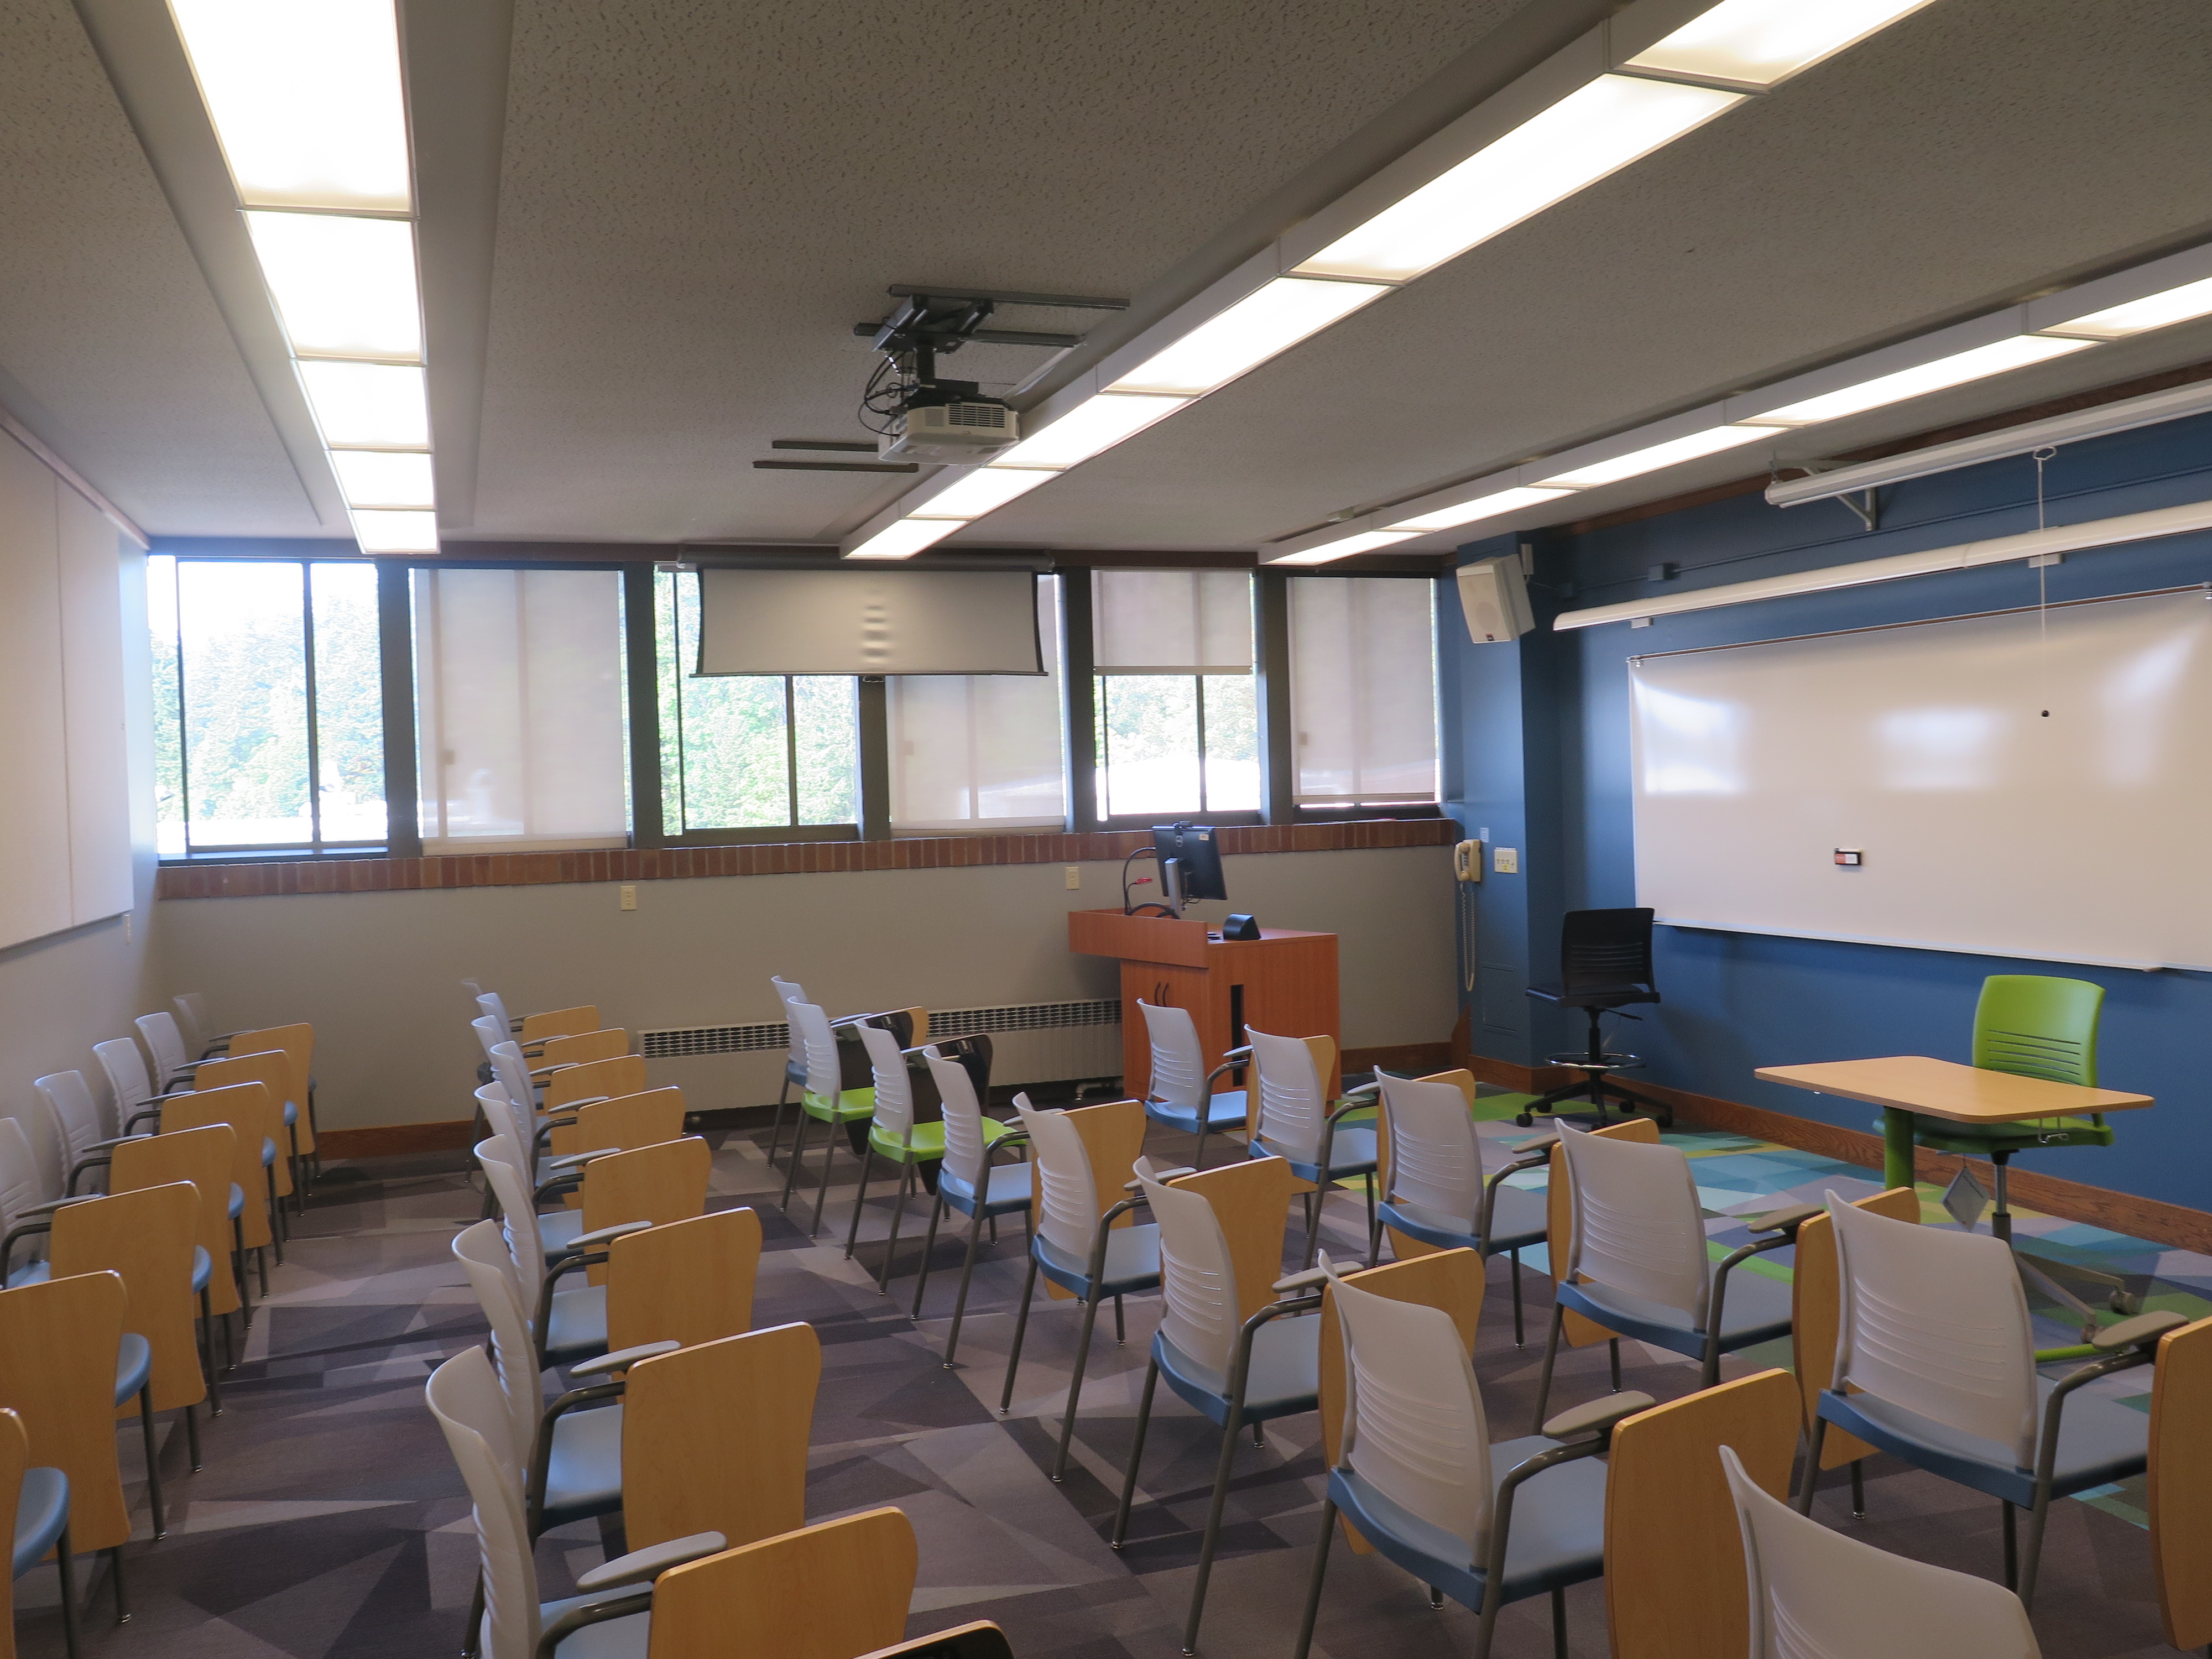 This room contains carpet floor, Moveable Tablet armchairs, whiteboard at the front of the room and a podium. 